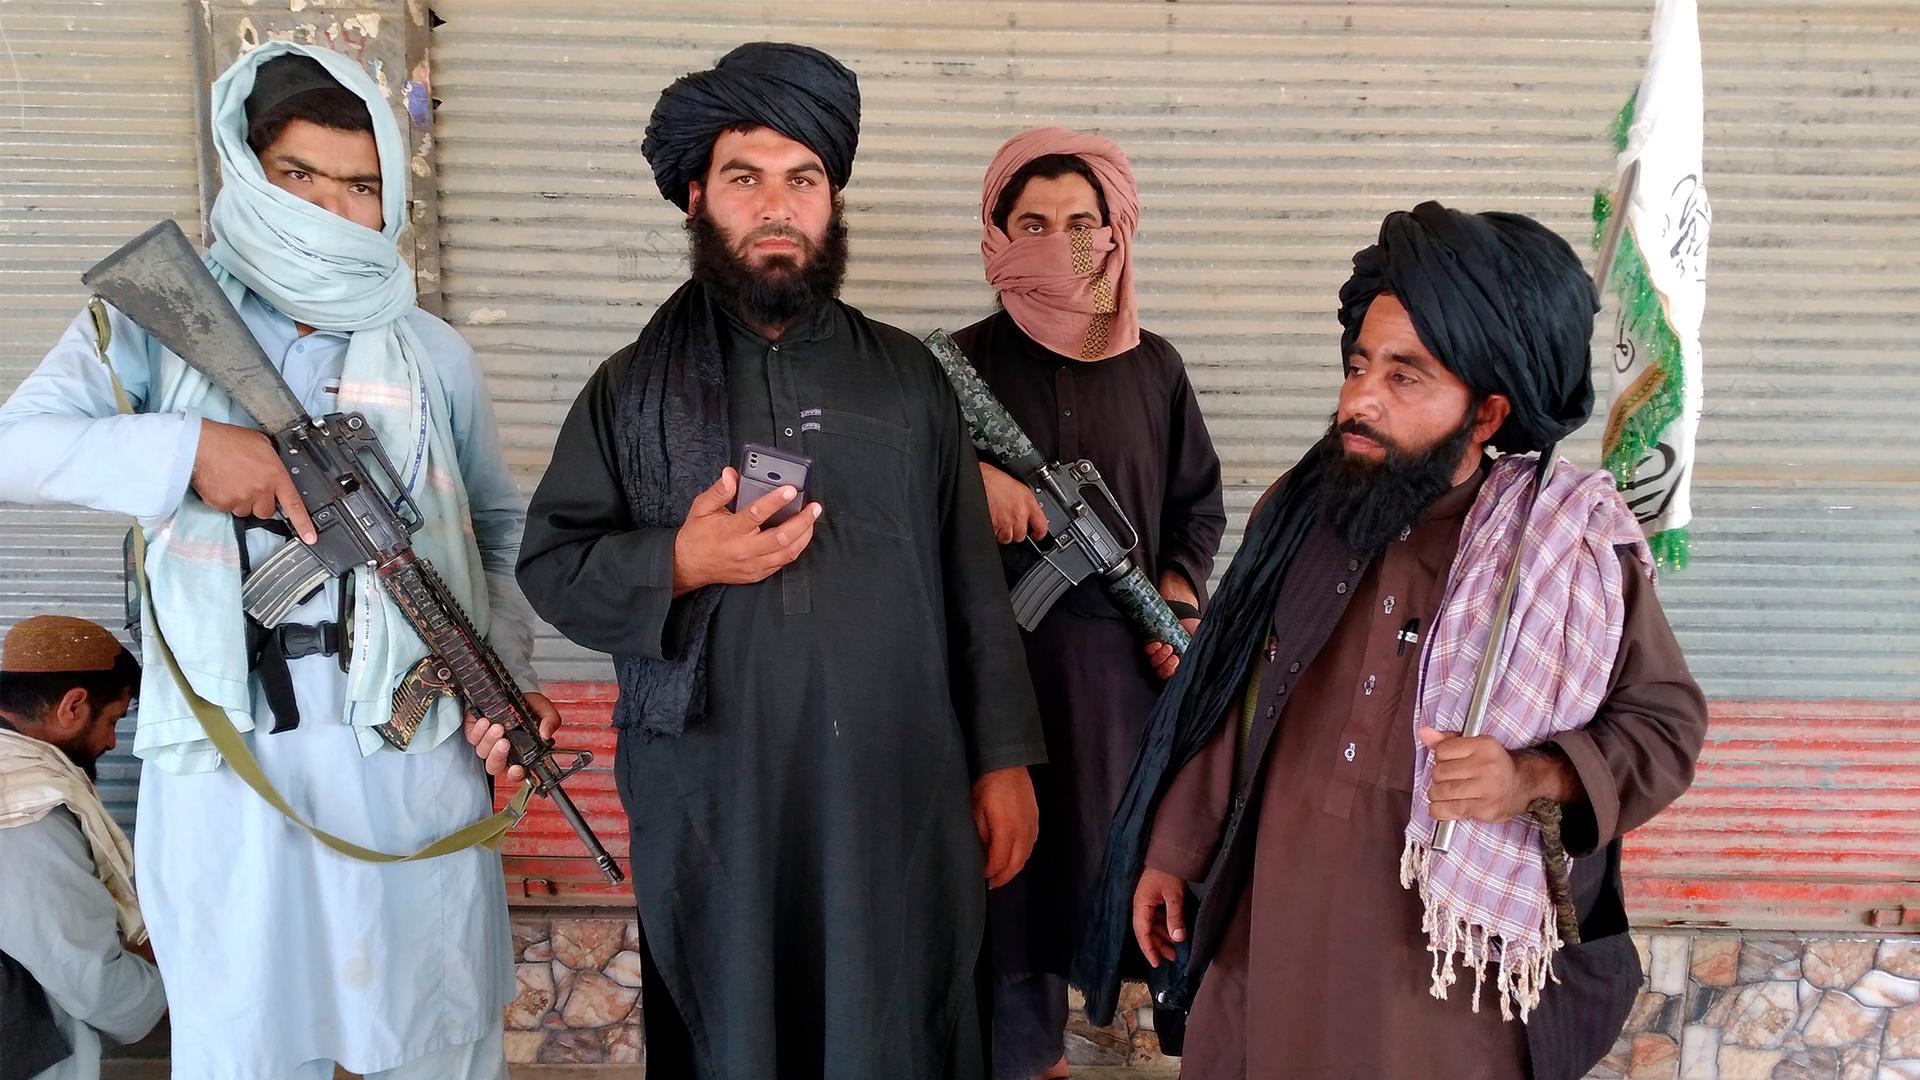 Four men are shown wearing traditional Afghani robes with two men holding large weapons.